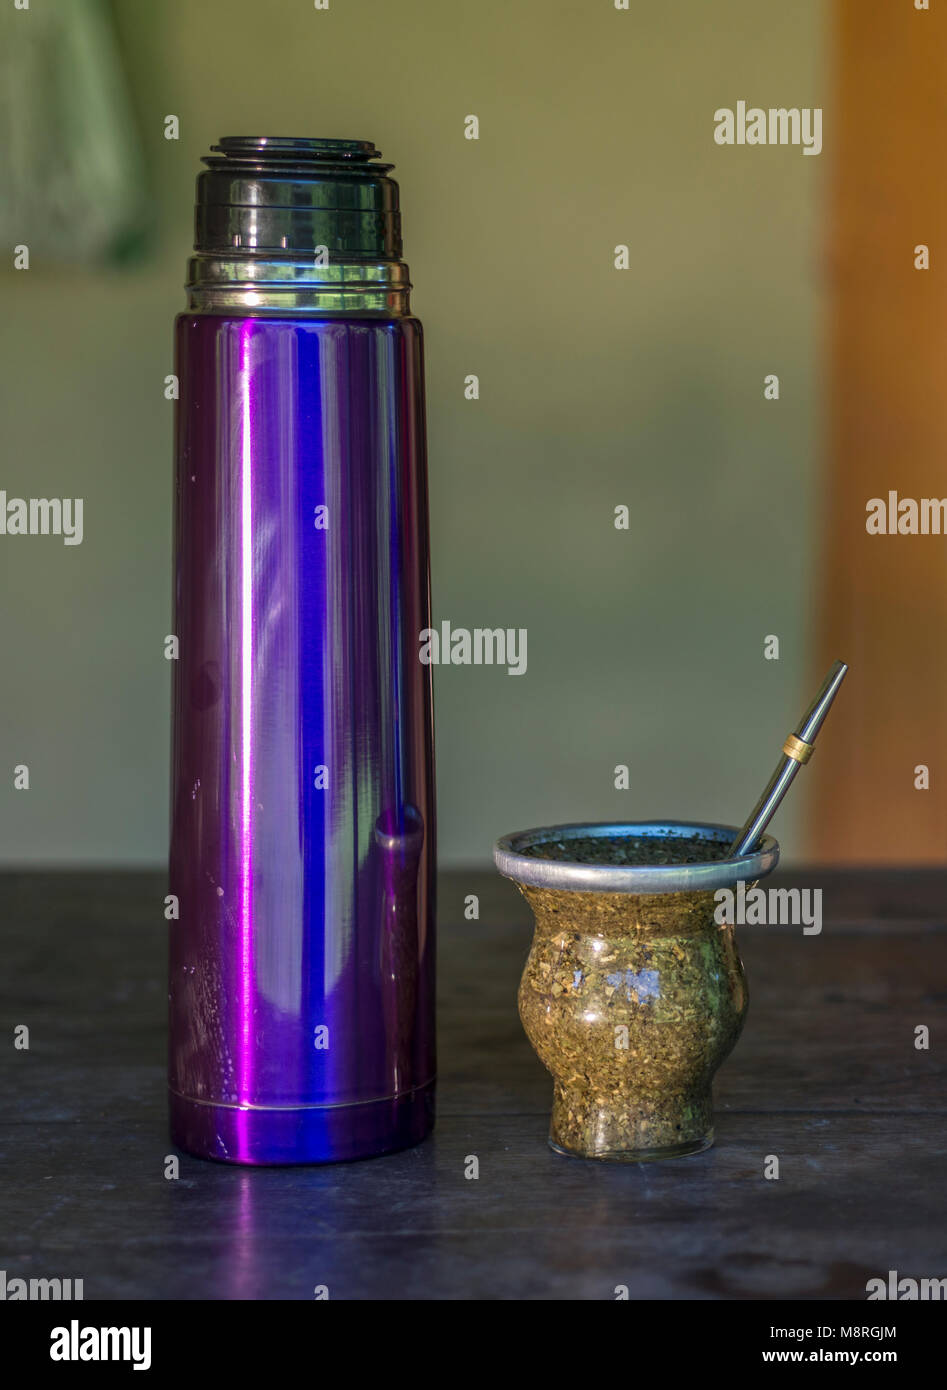 https://c8.alamy.com/comp/M8RGJM/mate-of-glass-and-violet-thermo-typical-latin-american-infusion-on-M8RGJM.jpg